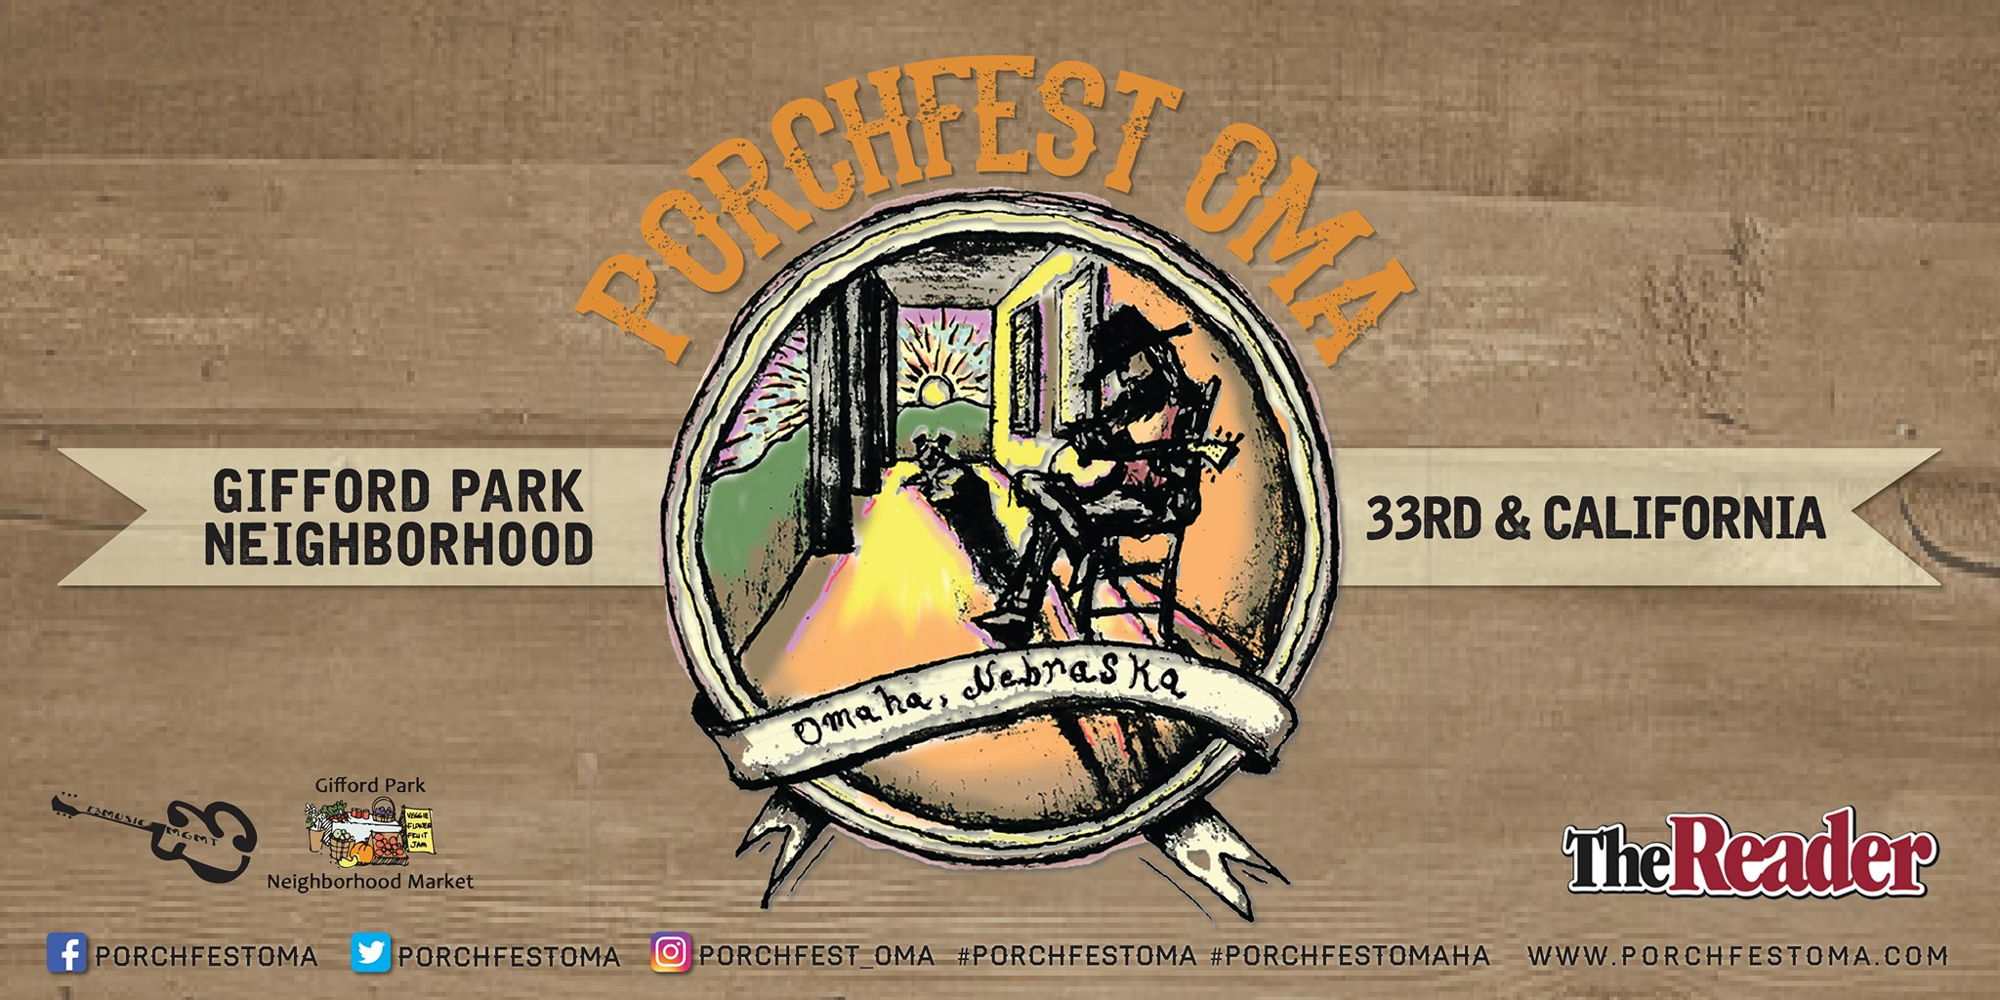 6th Annual Porchfest OMA promotional image